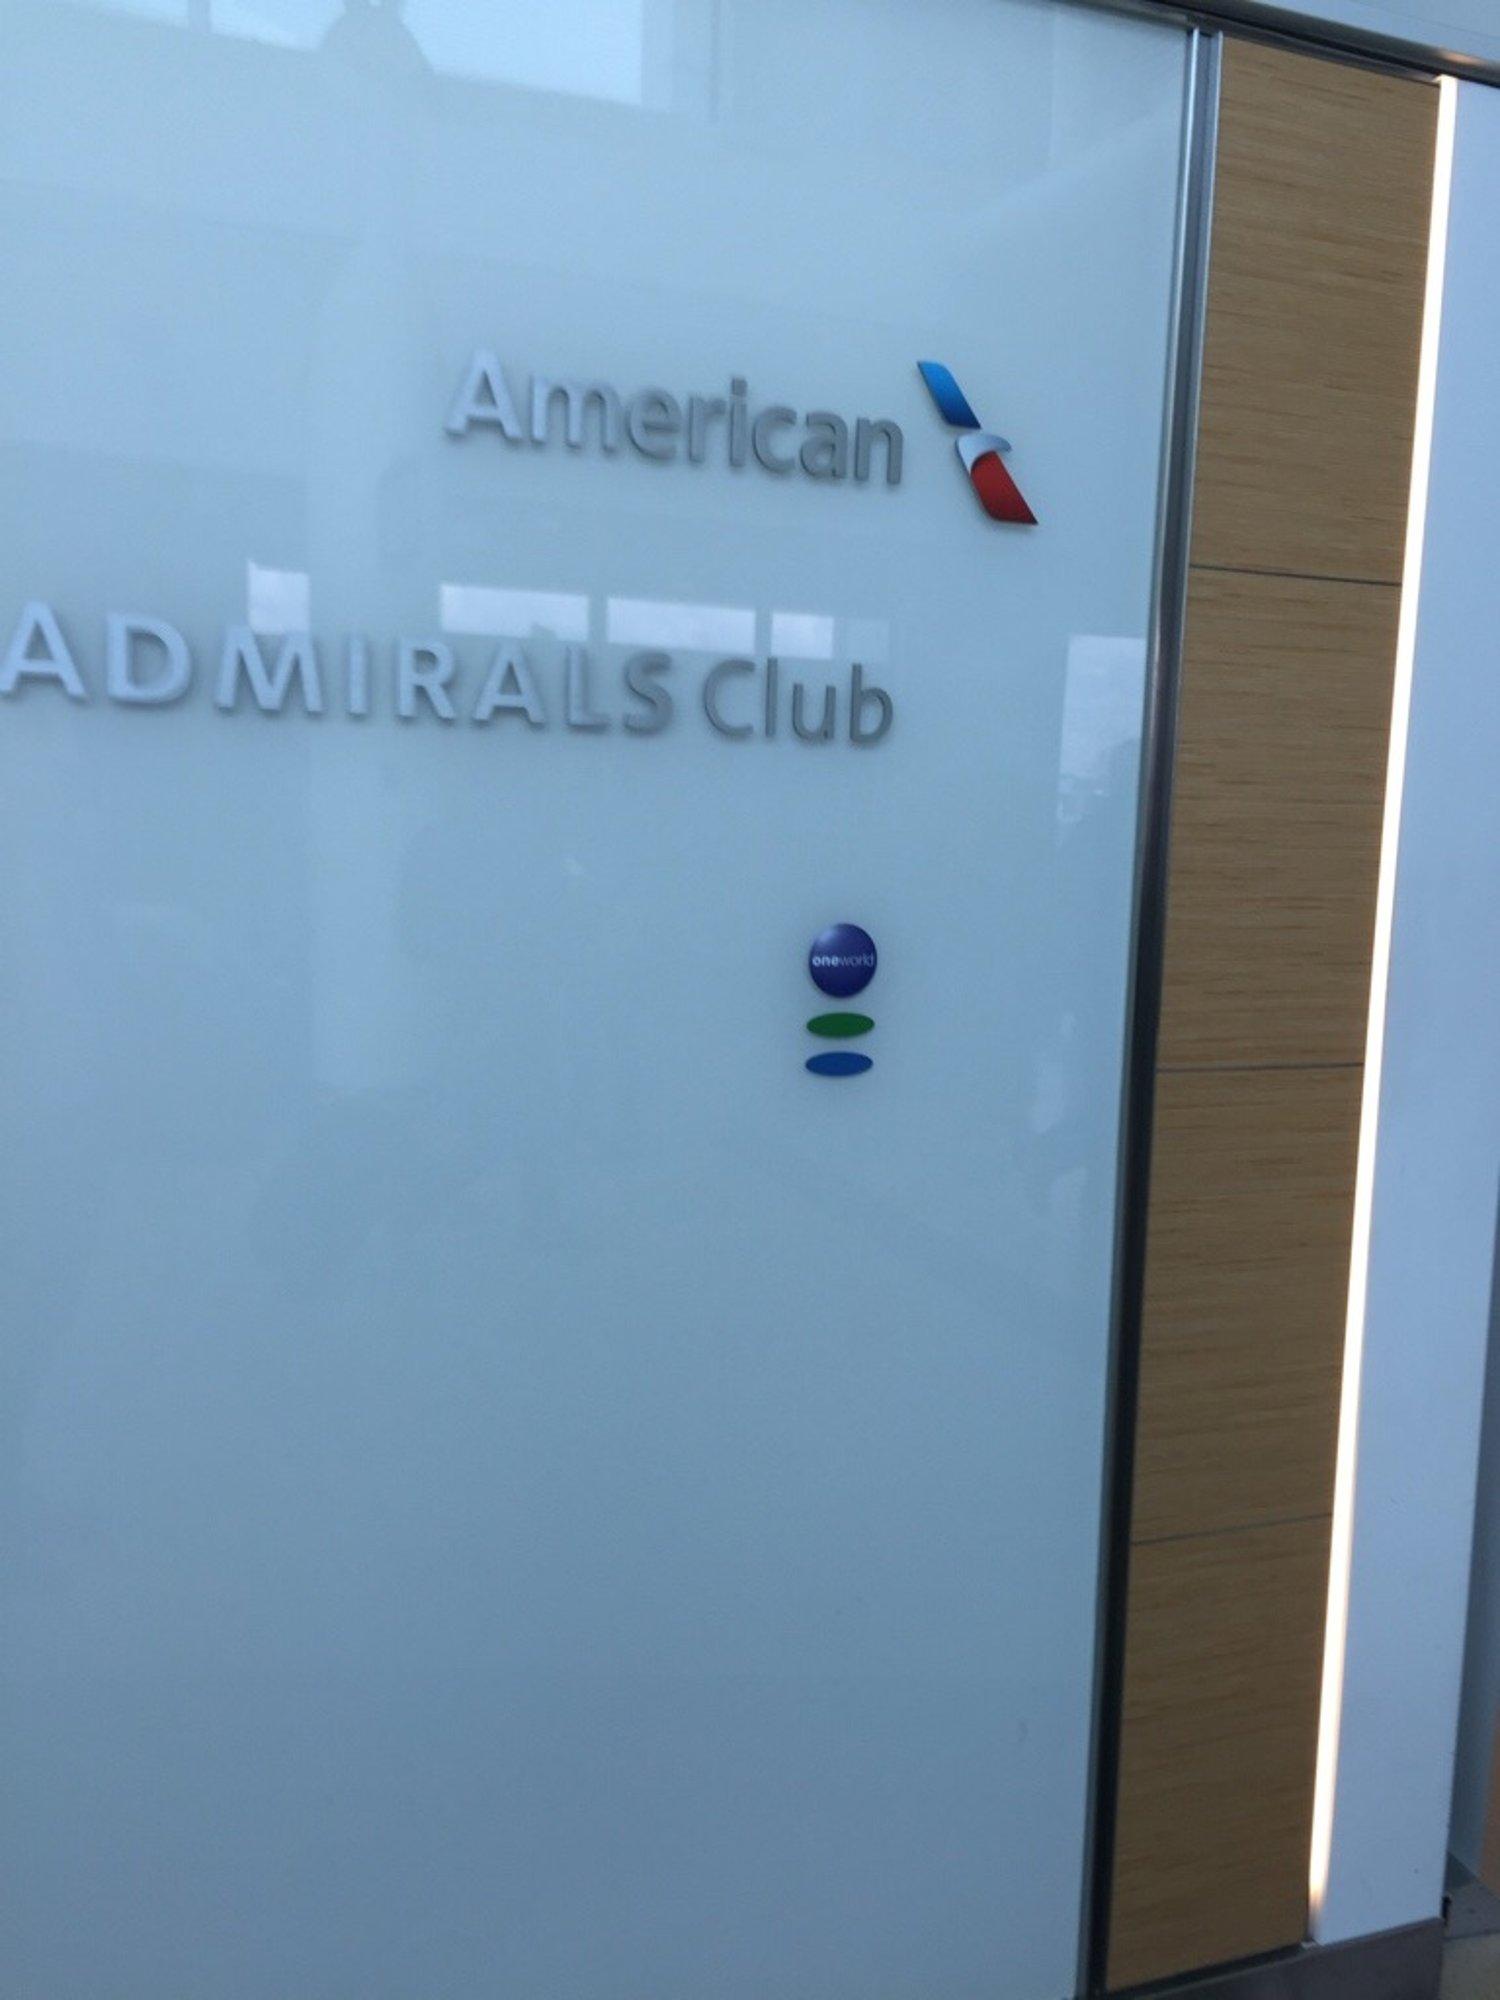 American Airlines Admirals Club image 33 of 50